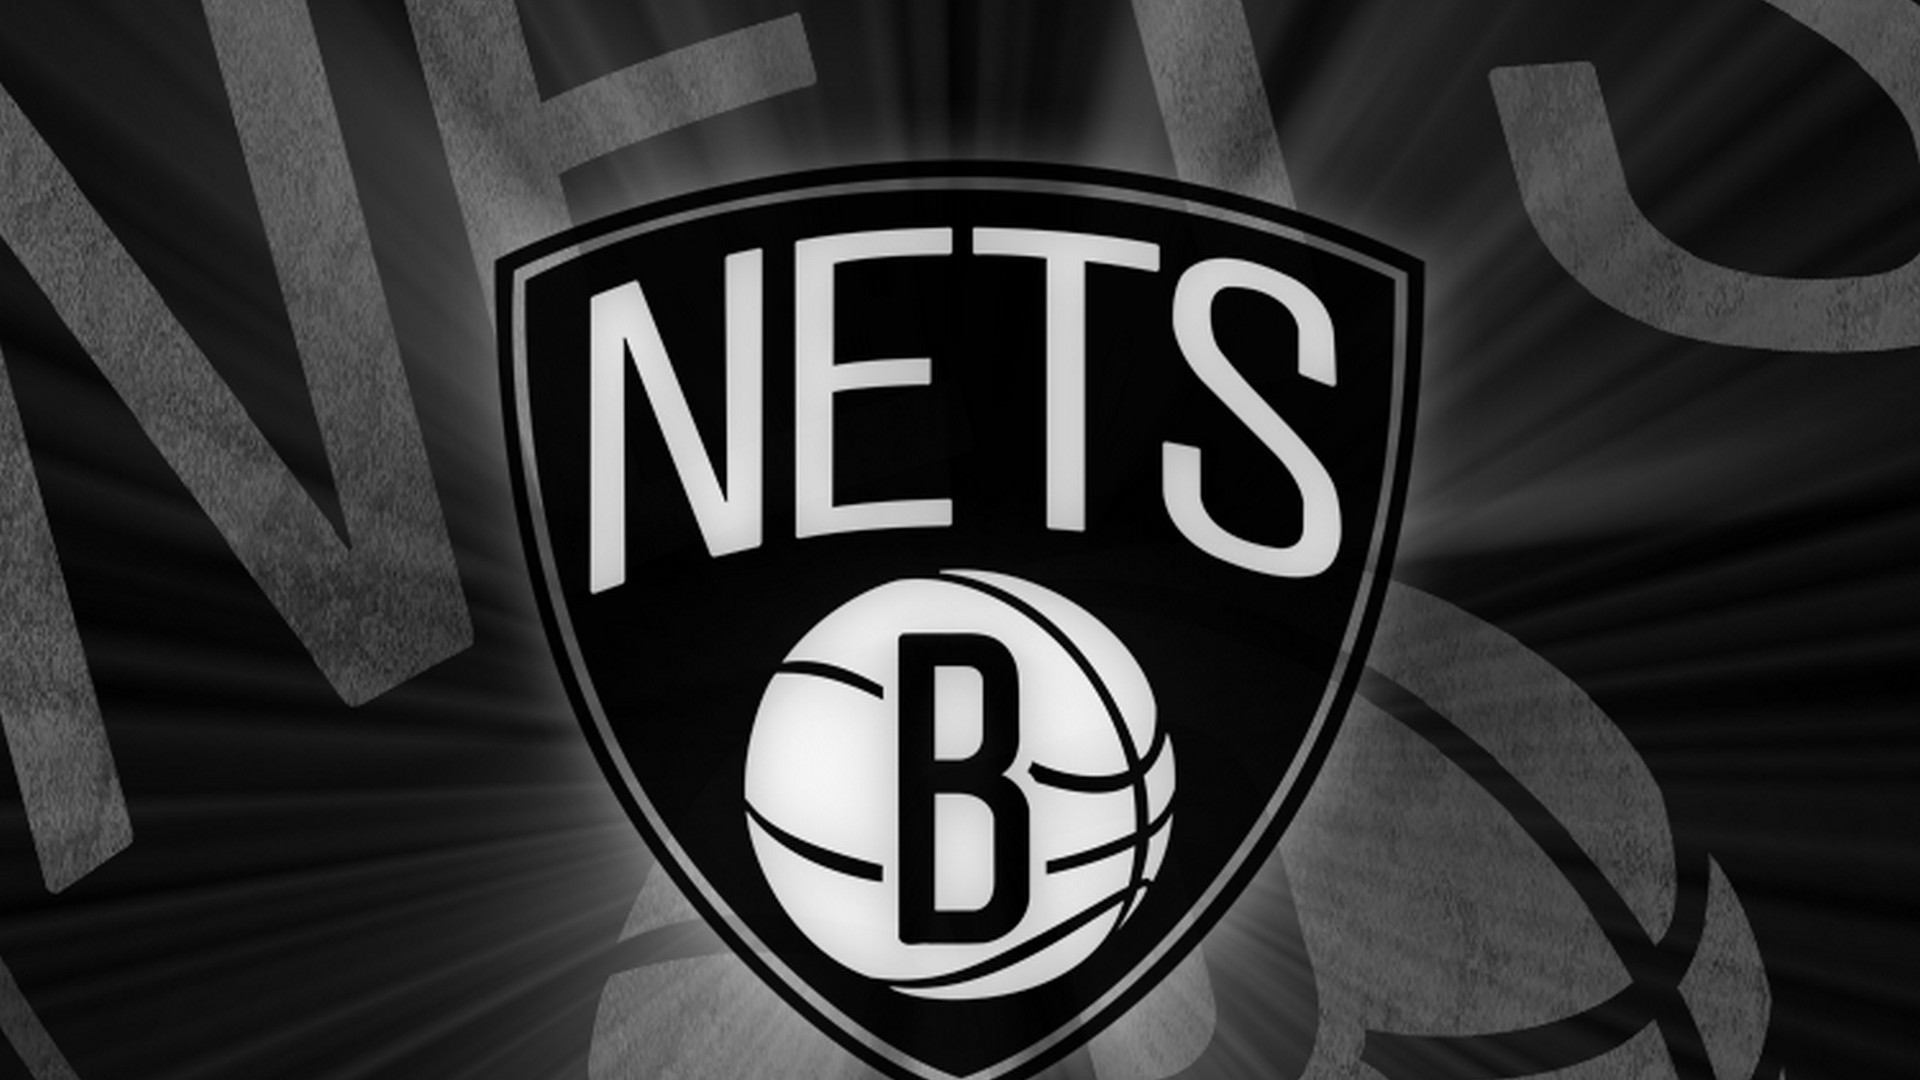 Backgrounds Brooklyn Nets HD with image dimensions 1920x1080 pixel. You can make this wallpaper for your Desktop Computer Backgrounds, Windows or Mac Screensavers, iPhone Lock screen, Tablet or Android and another Mobile Phone device